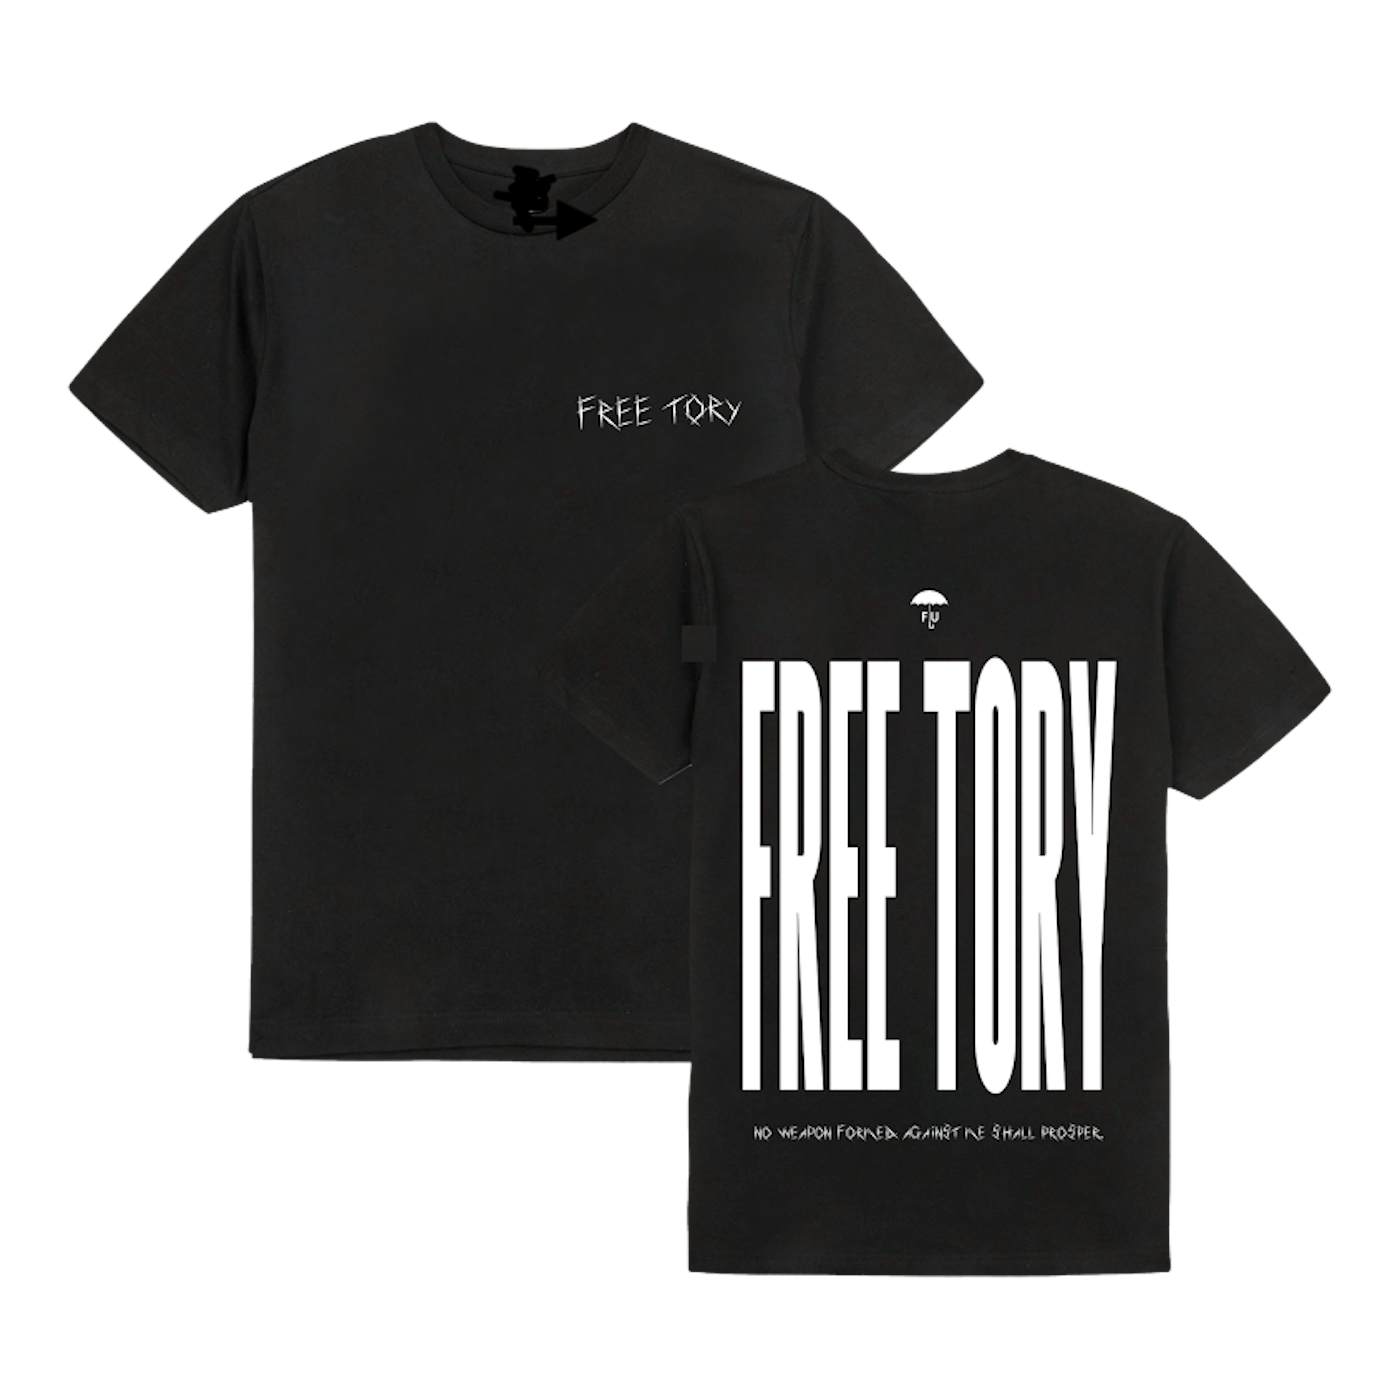 Tory Lanez Free Tory two sided tee